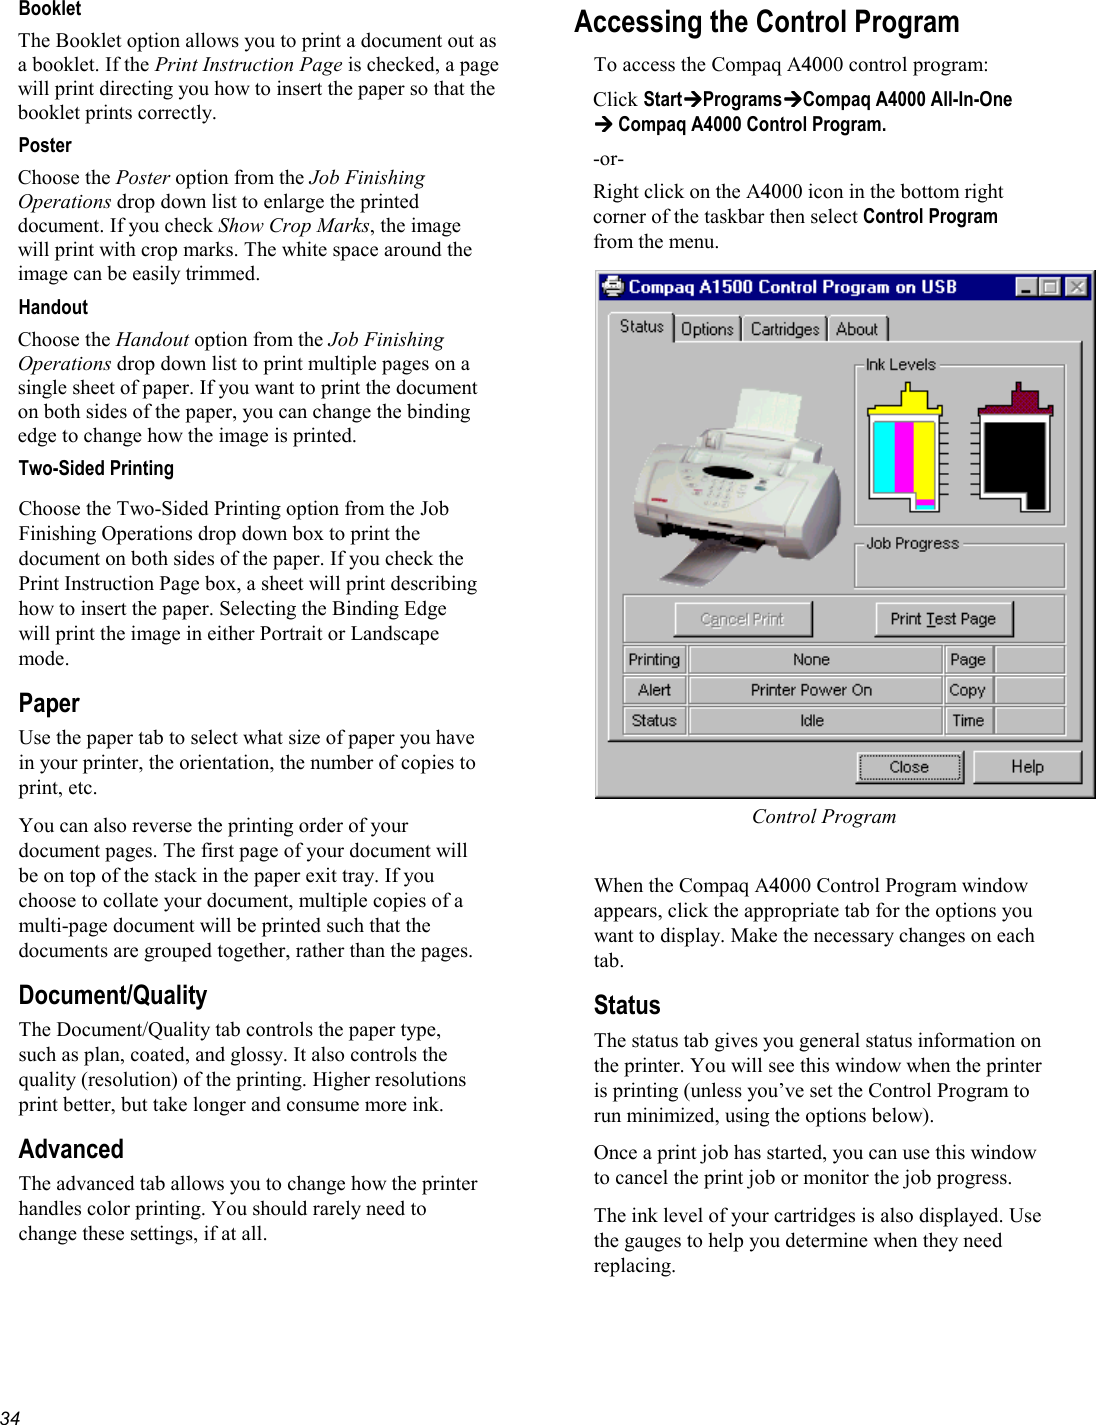   34Booklet The Booklet option allows you to print a document out as a booklet. If the Print Instruction Page is checked, a page will print directing you how to insert the paper so that the booklet prints correctly. Poster Choose the Poster option from the Job Finishing Operations drop down list to enlarge the printed document. If you check Show Crop Marks, the image will print with crop marks. The white space around the image can be easily trimmed. Handout Choose the Handout option from the Job Finishing Operations drop down list to print multiple pages on a single sheet of paper. If you want to print the document on both sides of the paper, you can change the binding edge to change how the image is printed.  Two-Sided Printing Choose the Two-Sided Printing option from the Job Finishing Operations drop down box to print the document on both sides of the paper. If you check the Print Instruction Page box, a sheet will print describing how to insert the paper. Selecting the Binding Edge will print the image in either Portrait or Landscape mode. Paper Use the paper tab to select what size of paper you have in your printer, the orientation, the number of copies to print, etc. You can also reverse the printing order of your document pages. The first page of your document will be on top of the stack in the paper exit tray. If you choose to collate your document, multiple copies of a multi-page document will be printed such that the documents are grouped together, rather than the pages. Document/Quality The Document/Quality tab controls the paper type, such as plan, coated, and glossy. It also controls the quality (resolution) of the printing. Higher resolutions print better, but take longer and consume more ink. Advanced The advanced tab allows you to change how the printer handles color printing. You should rarely need to change these settings, if at all. Accessing the Control Program To access the Compaq A4000 control program: Click StartProgramsCompaq A4000 All-In-One  Compaq A4000 Control Program. -or- Right click on the A4000 icon in the bottom right corner of the taskbar then select Control Program from the menu. Control Program  When the Compaq A4000 Control Program window appears, click the appropriate tab for the options you want to display. Make the necessary changes on each tab.  Status The status tab gives you general status information on the printer. You will see this window when the printer is printing (unless you’ve set the Control Program to run minimized, using the options below). Once a print job has started, you can use this window to cancel the print job or monitor the job progress. The ink level of your cartridges is also displayed. Use the gauges to help you determine when they need replacing. 